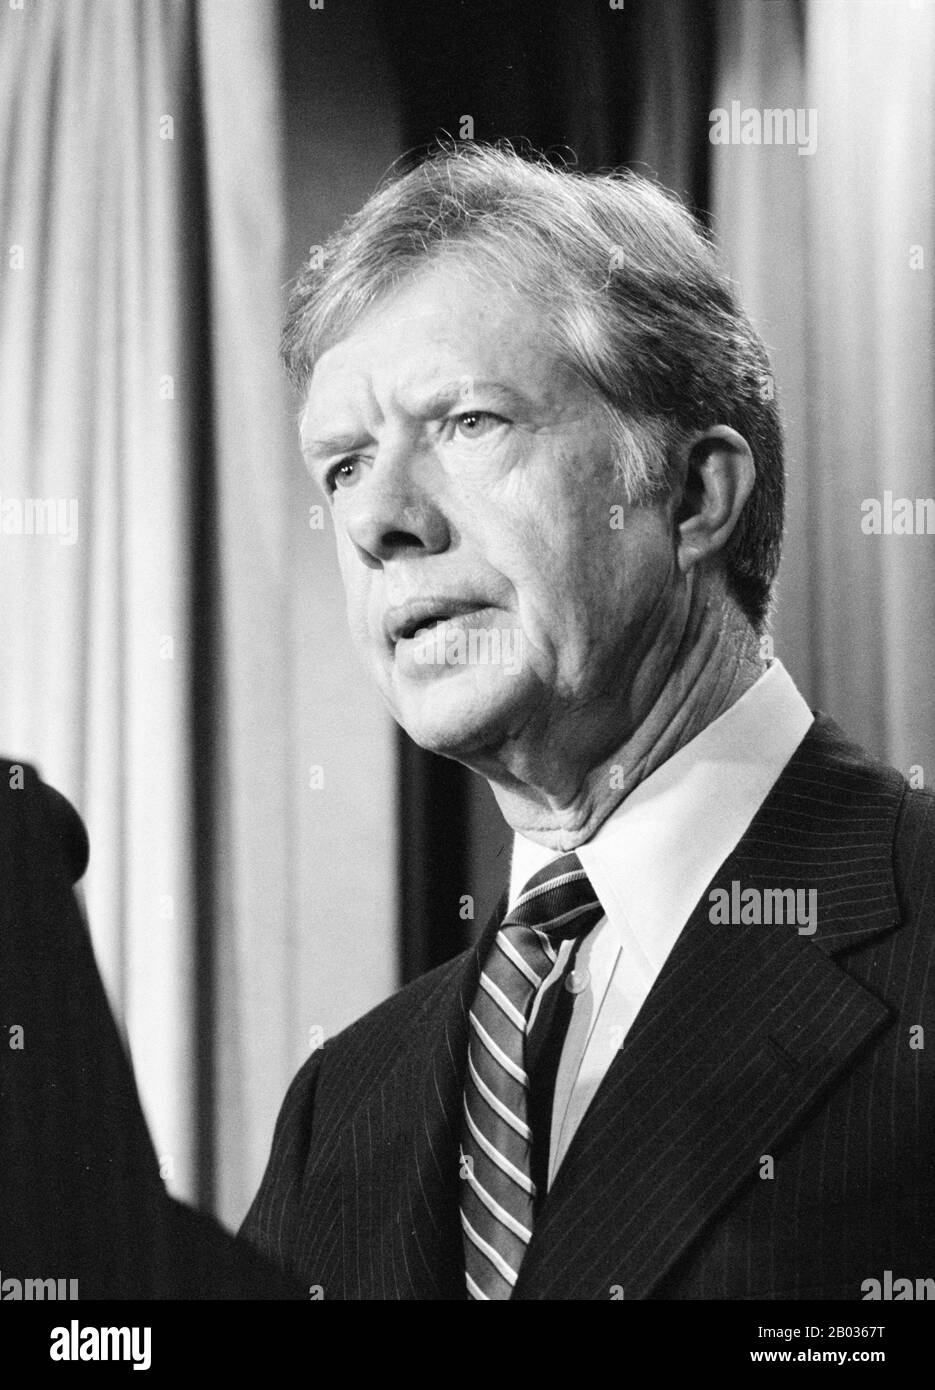 James Earl 'Jimmy' Carter Jr. (born October 1, 1924) is an American politician who served as the 39th President of the United States from 1977 to 1981. In 2002, he was awarded the Nobel Peace Prize for his work with the Carter Center.   Carter, a Democrat raised in rural Georgia, was a peanut farmer who served two terms as a Georgia State Senator, from 1963 to 1967, and one as the Governor of Georgia, from 1971 to 1975. He was elected President in 1976, defeating incumbent President Gerald Ford in a relatively close election; the Electoral College margin of 57 votes was the closest at that tim Stock Photo